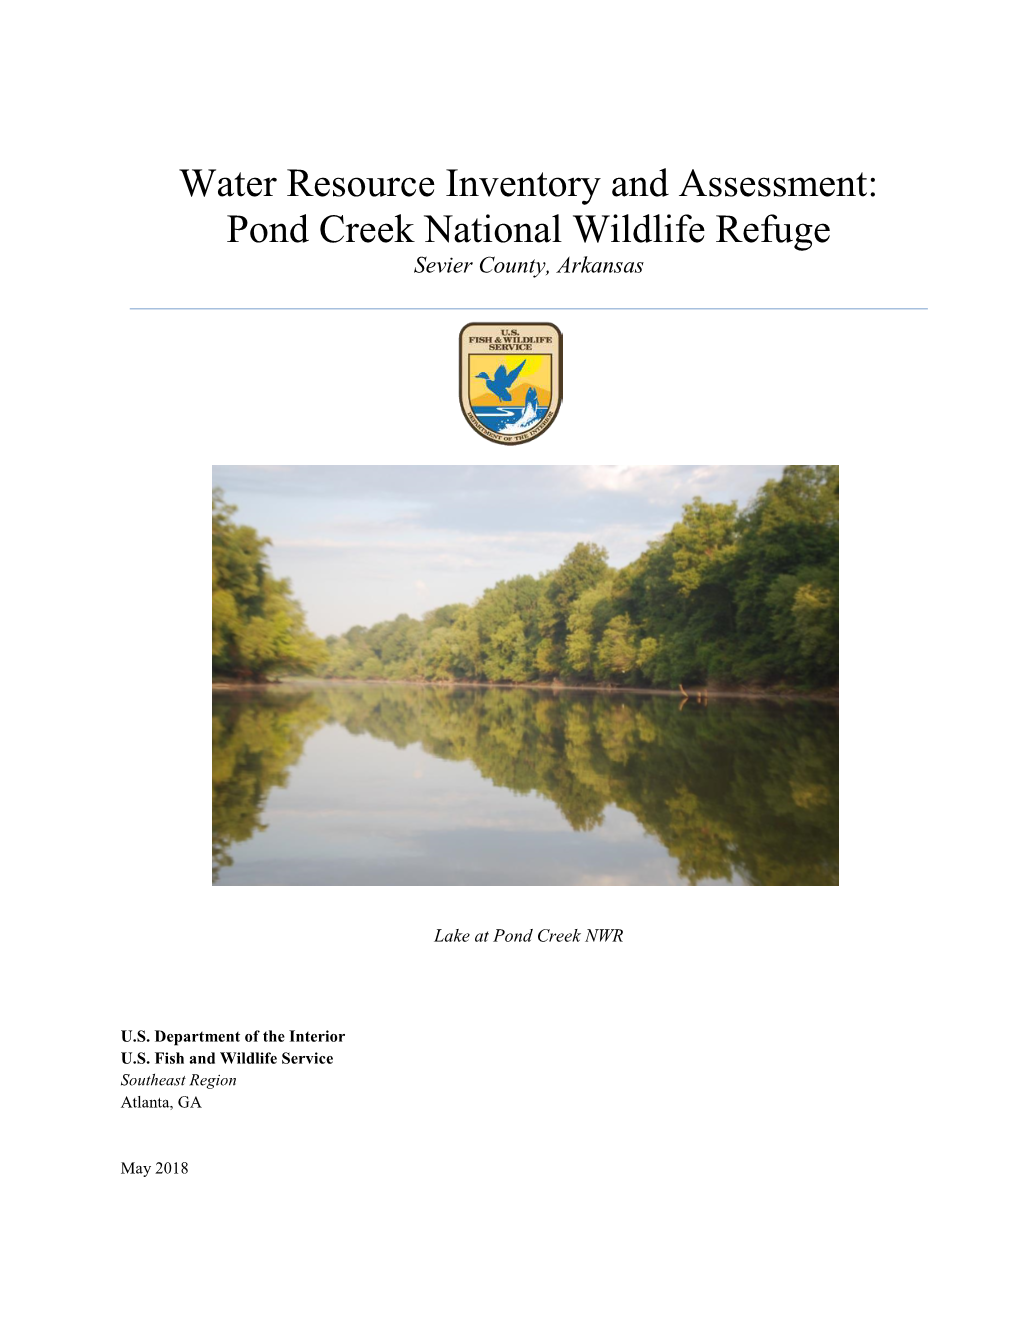 Water Resource Inventory and Assessment: Pond Creek National Wildlife Refuge Sevier County, Arkansas